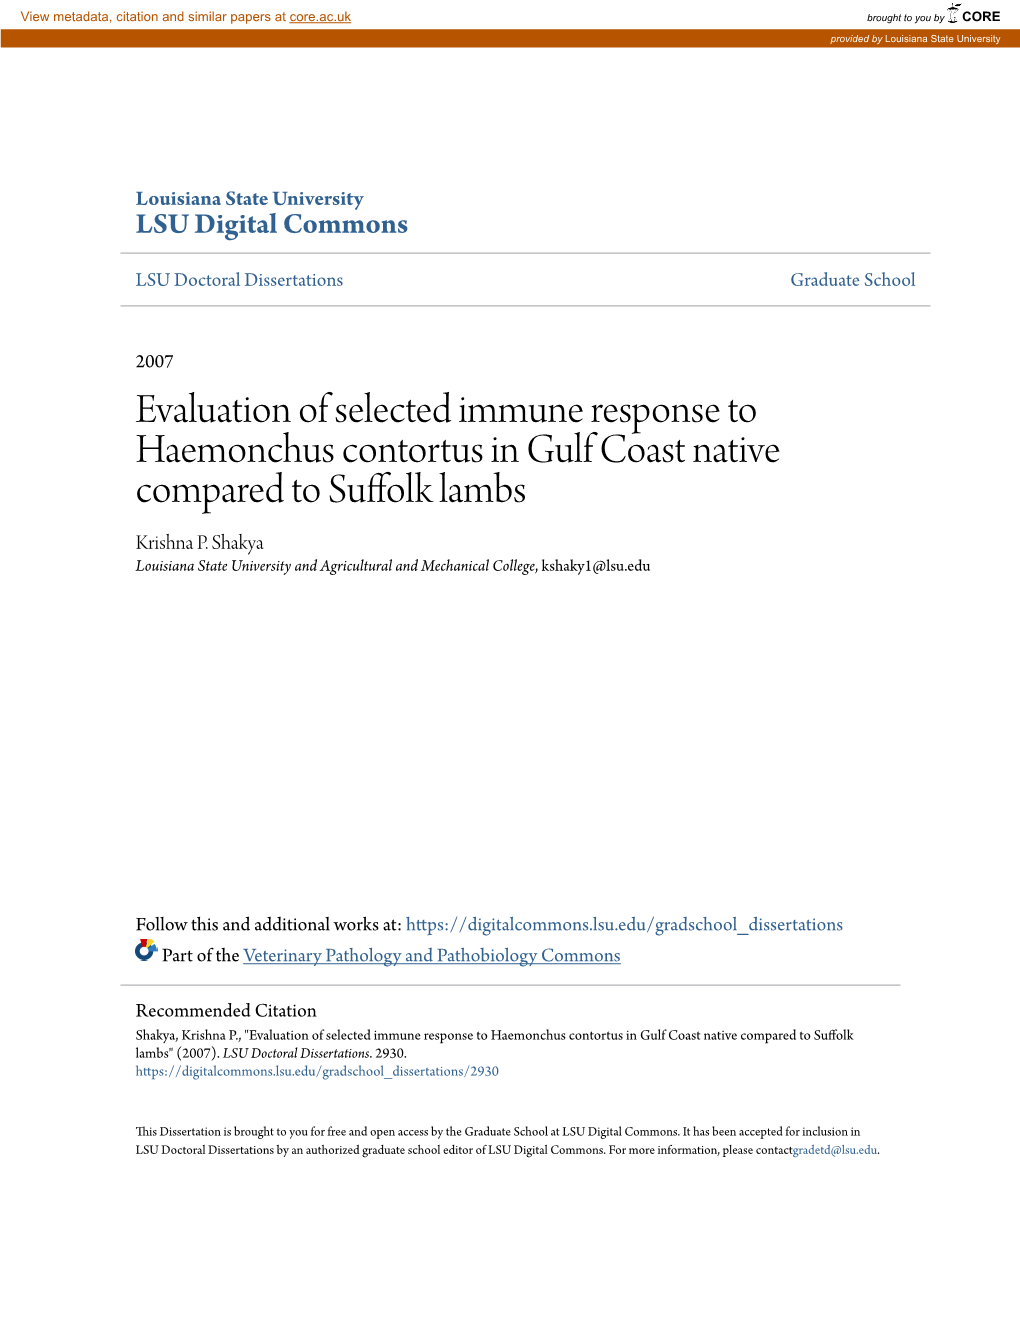 Evaluation of Selected Immune Response to Haemonchus Contortus in Gulf Coast Native Compared to Suffolk Lambs Krishna P